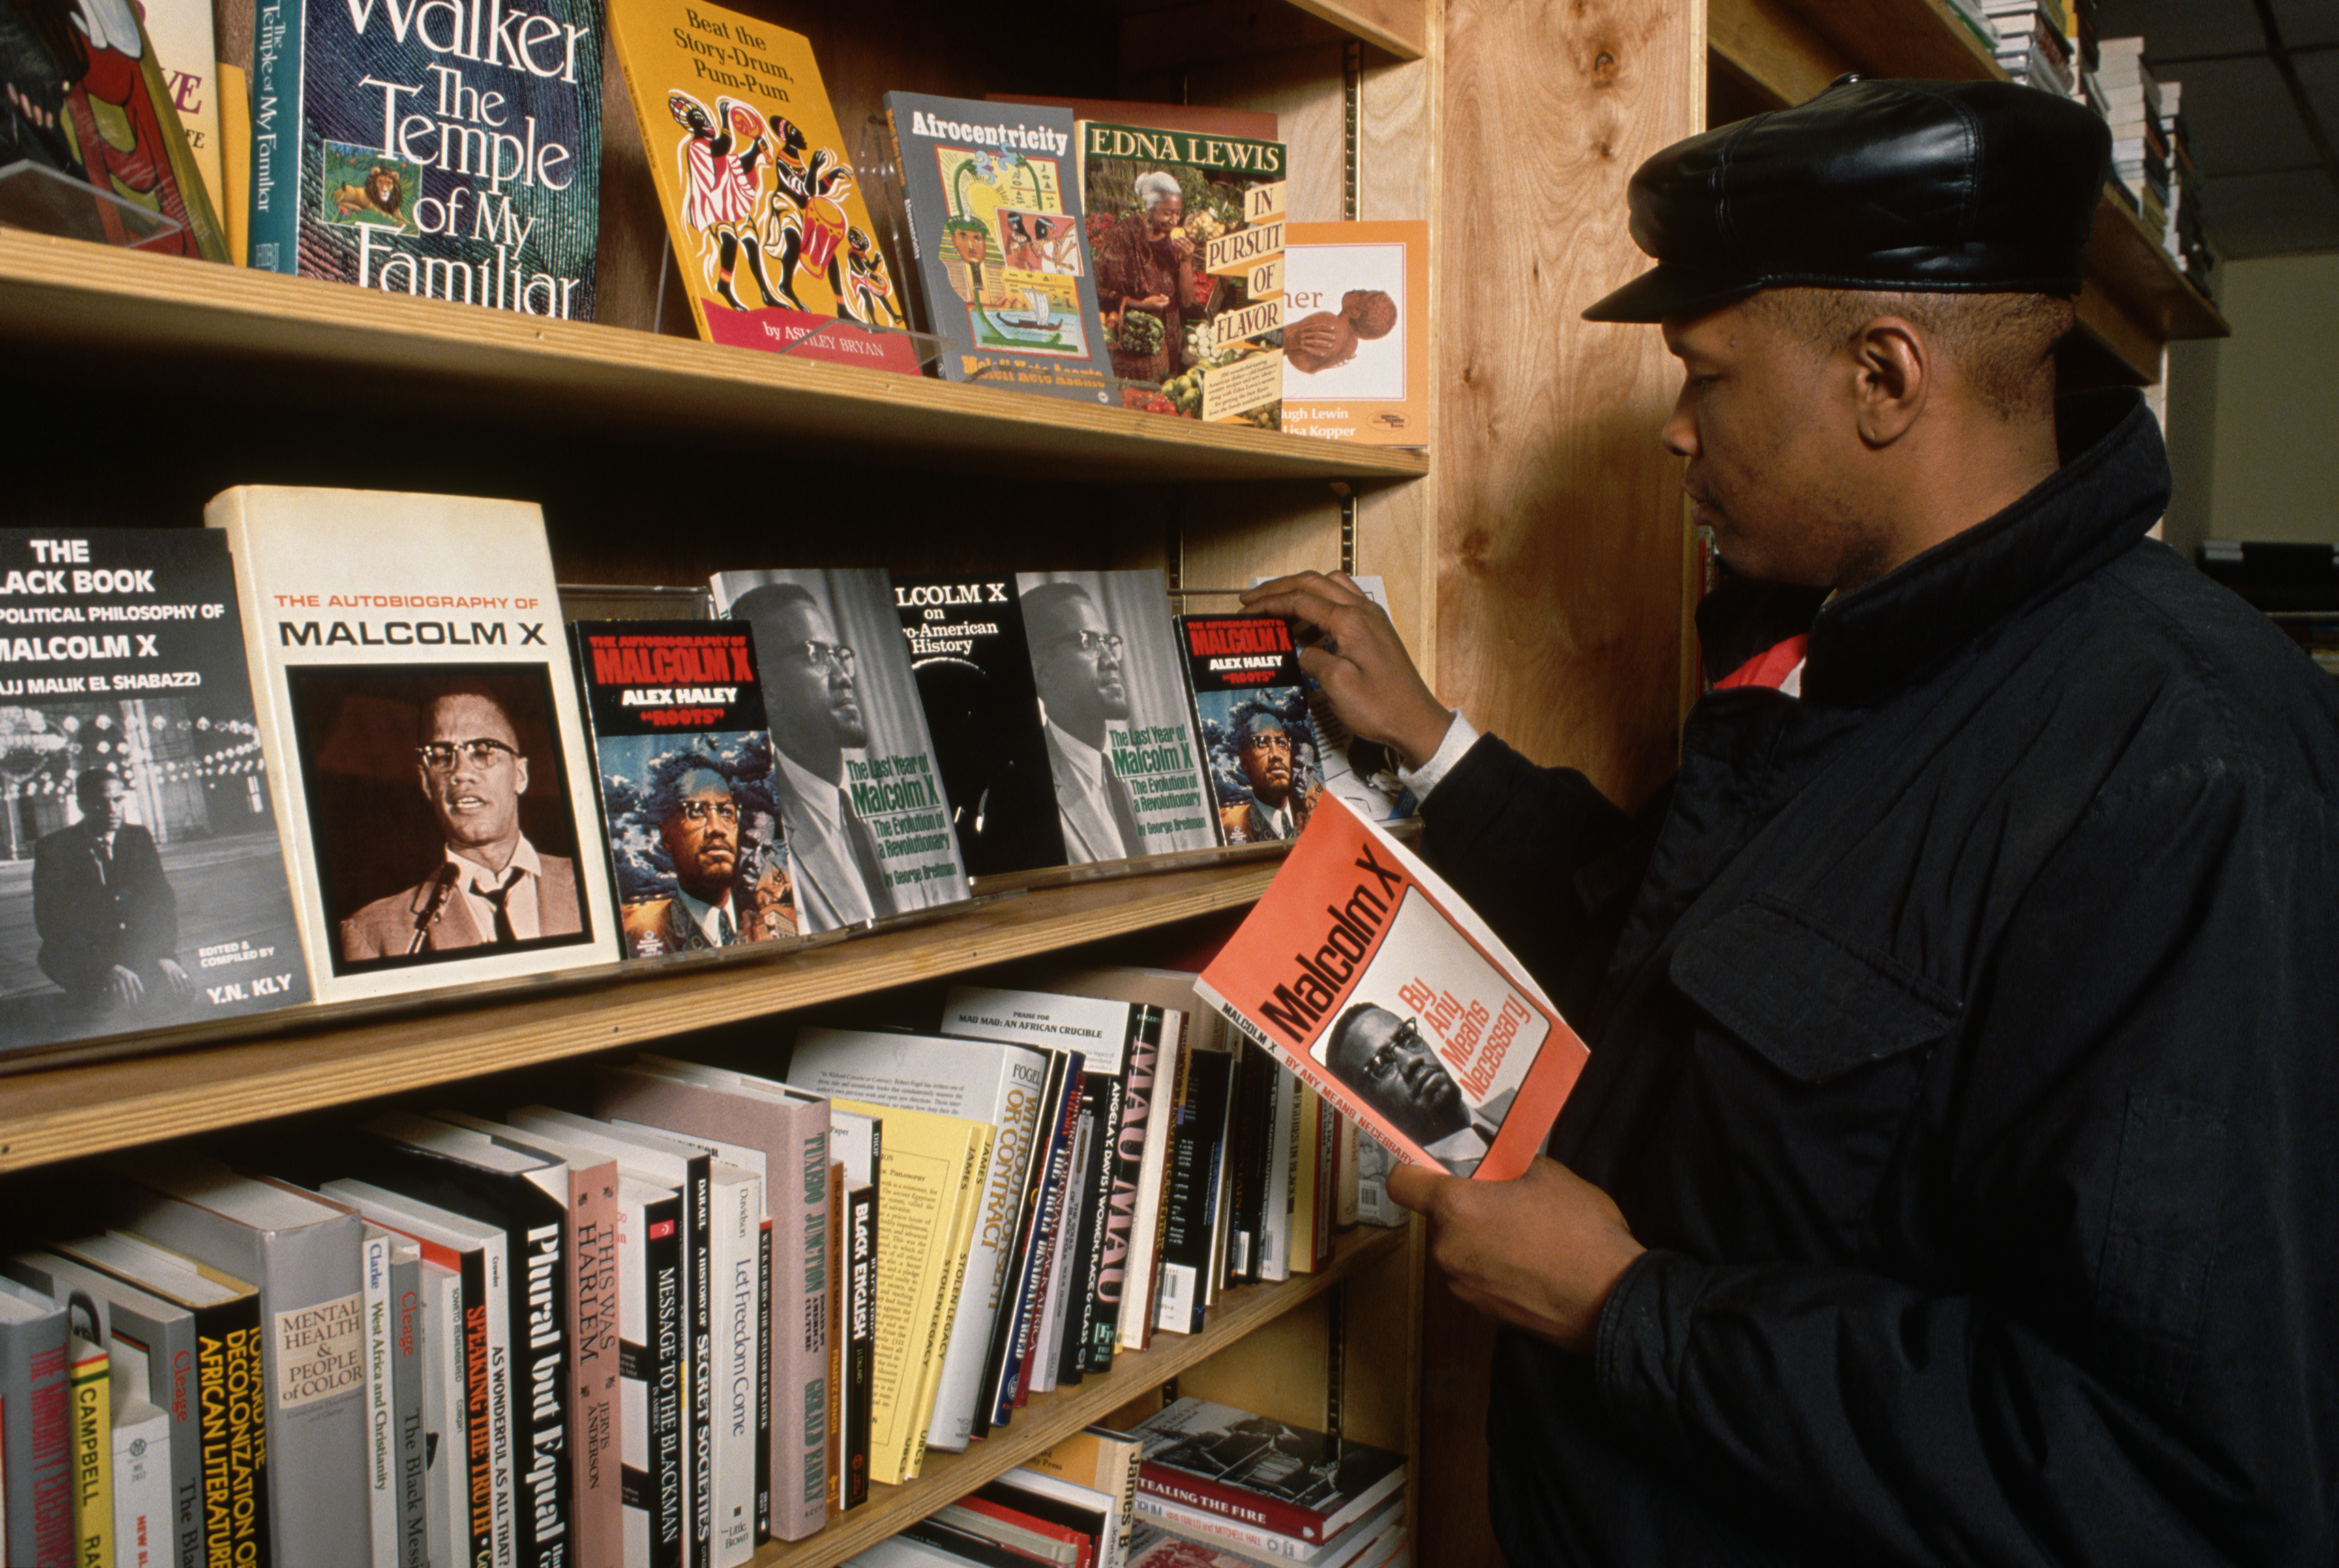 Man Looking at Malcolm X Books